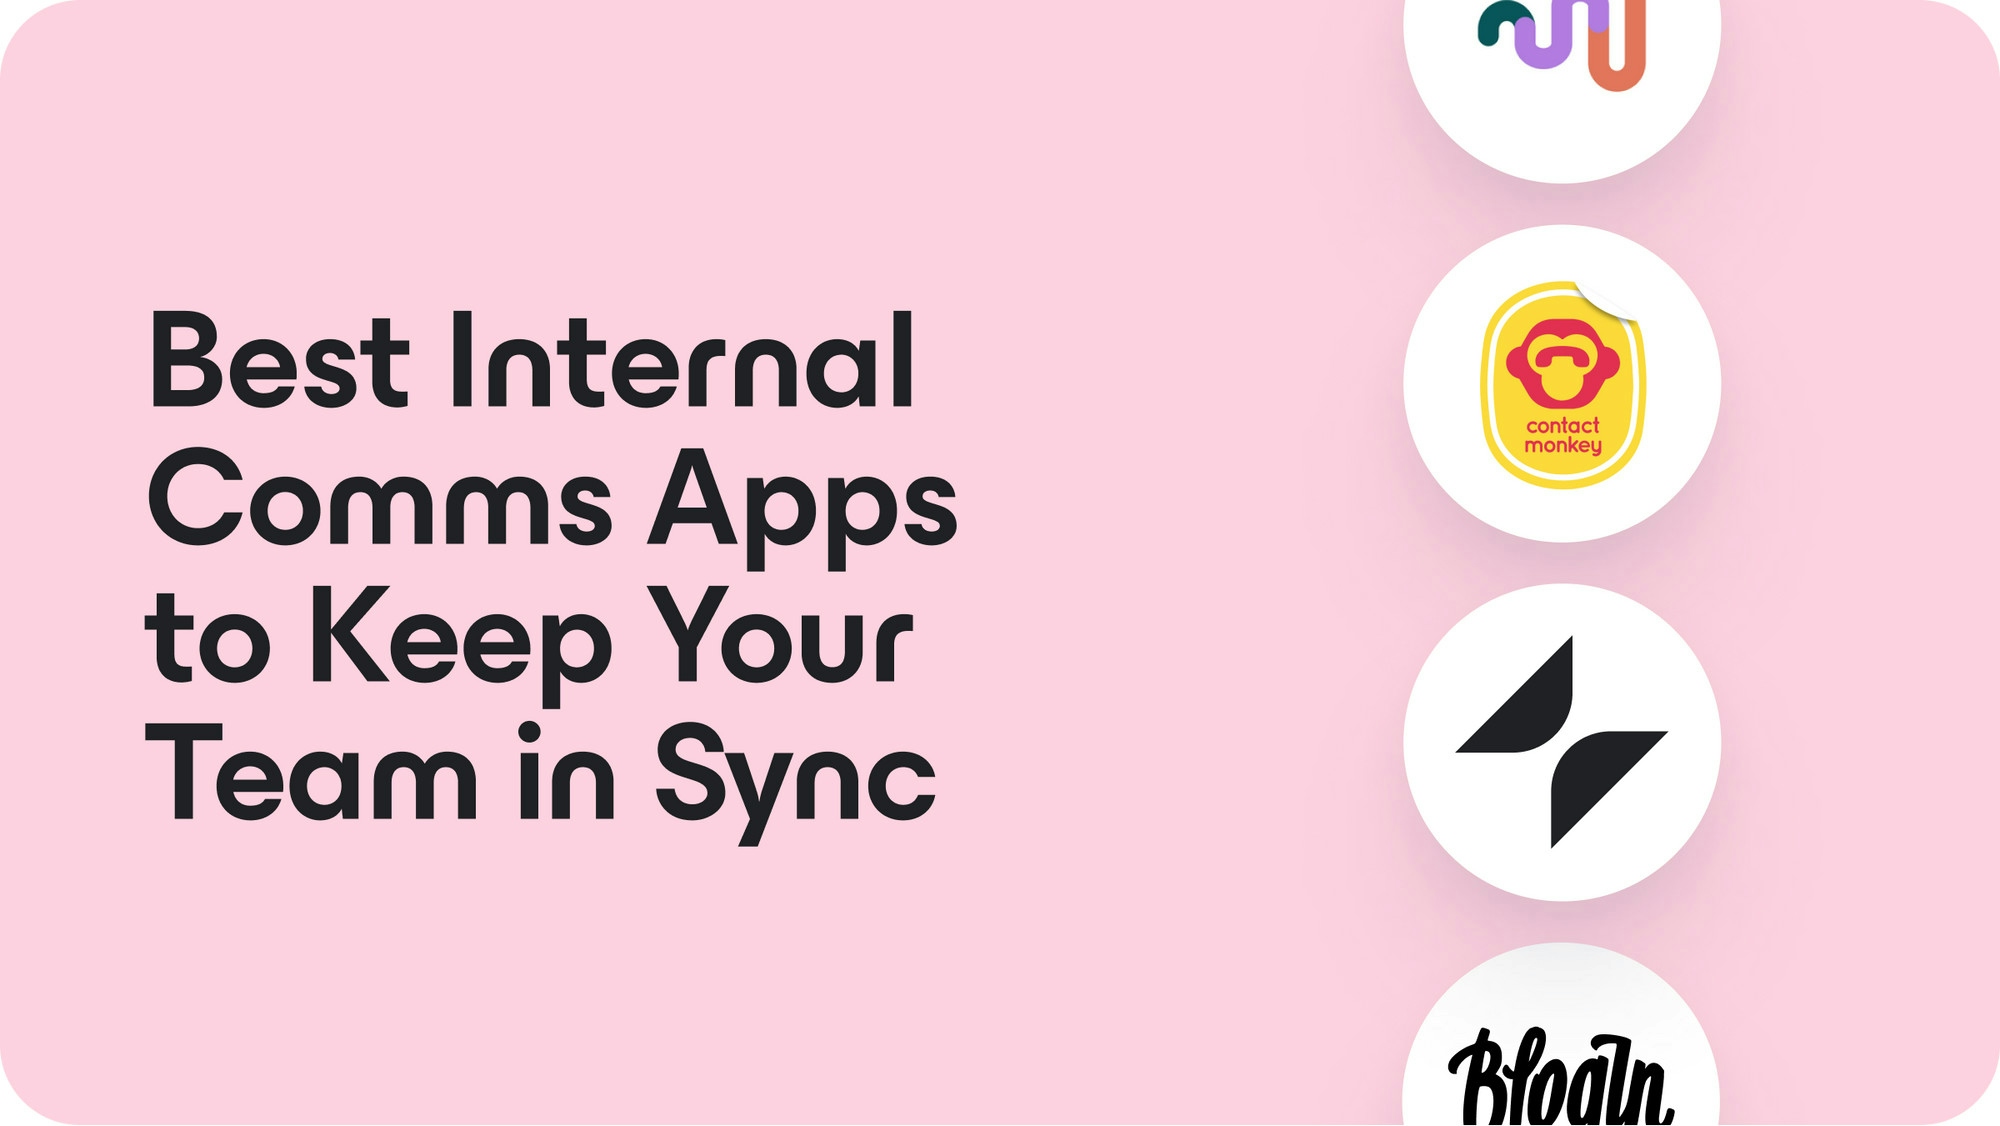 Check Out These 4 Internal Comms Apps